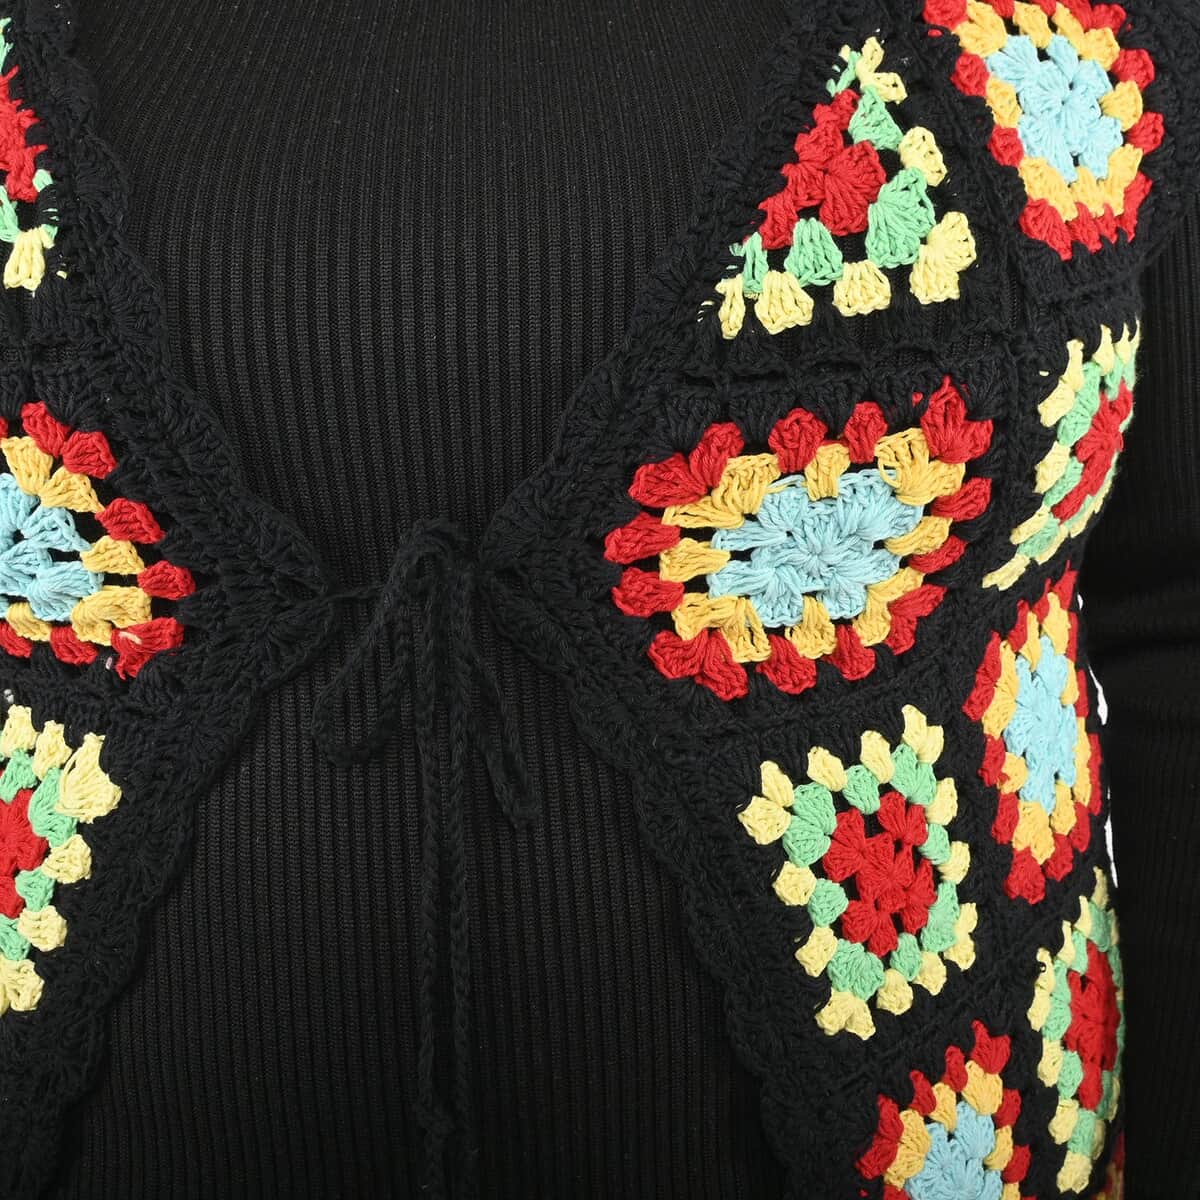 Tamsy Black and Red Traditional Handwoven Crochet Vest - One Size Fits Most image number 4